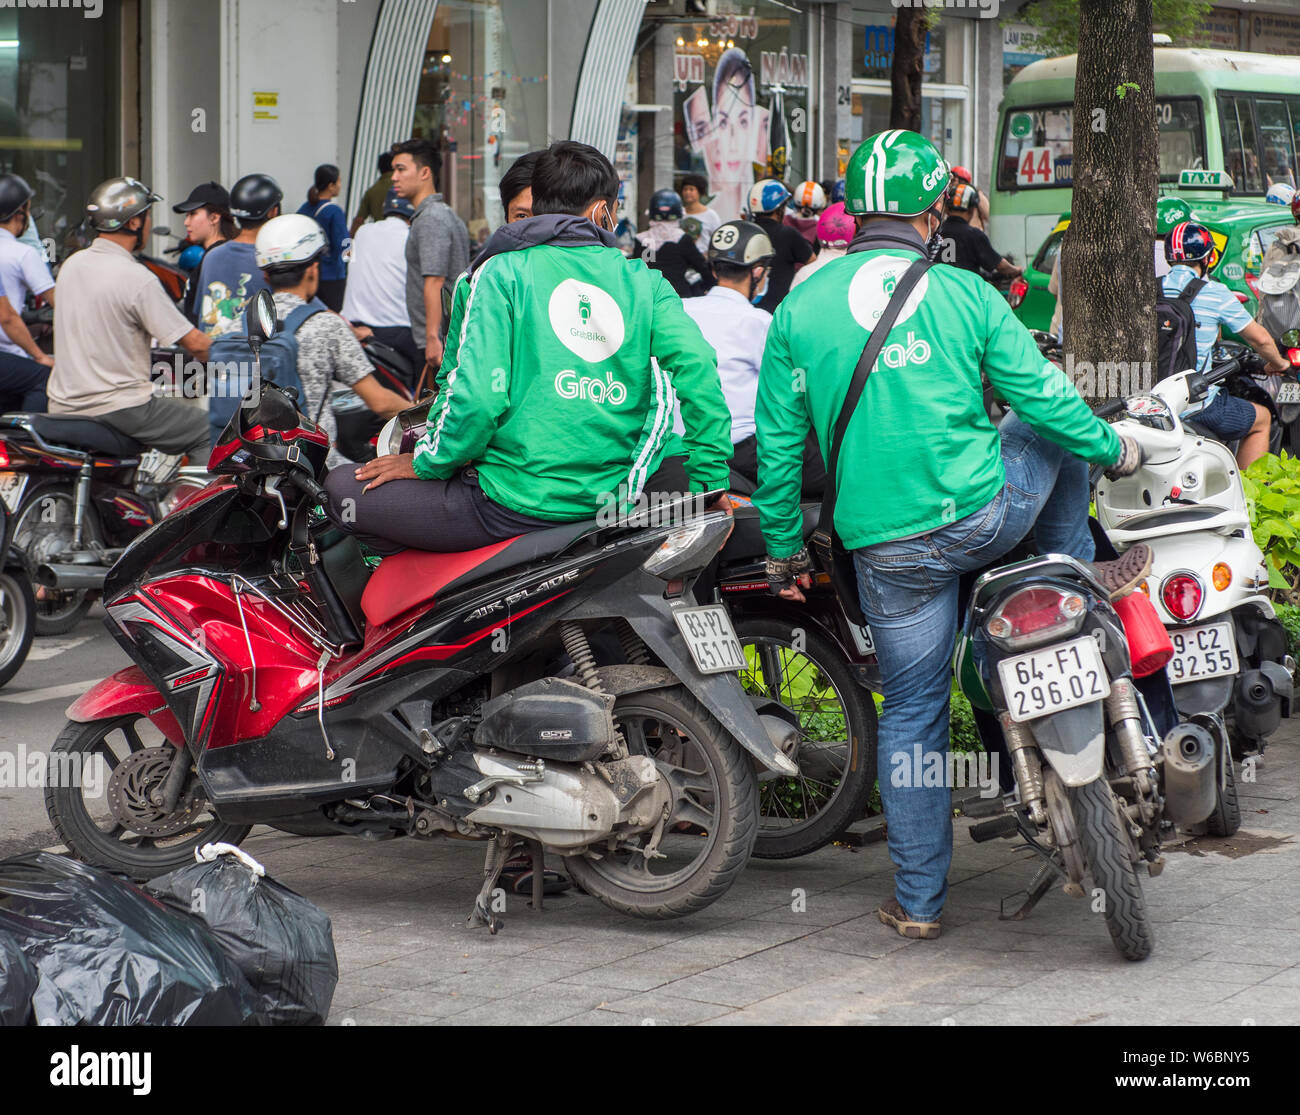 Ho Chi Minh City, Vietnam - July 28, 2017: Motorbike taxi driver from the controversial Grab ride-sharing system in downtown Ho Chi Minh City. Grab an Stock Photo